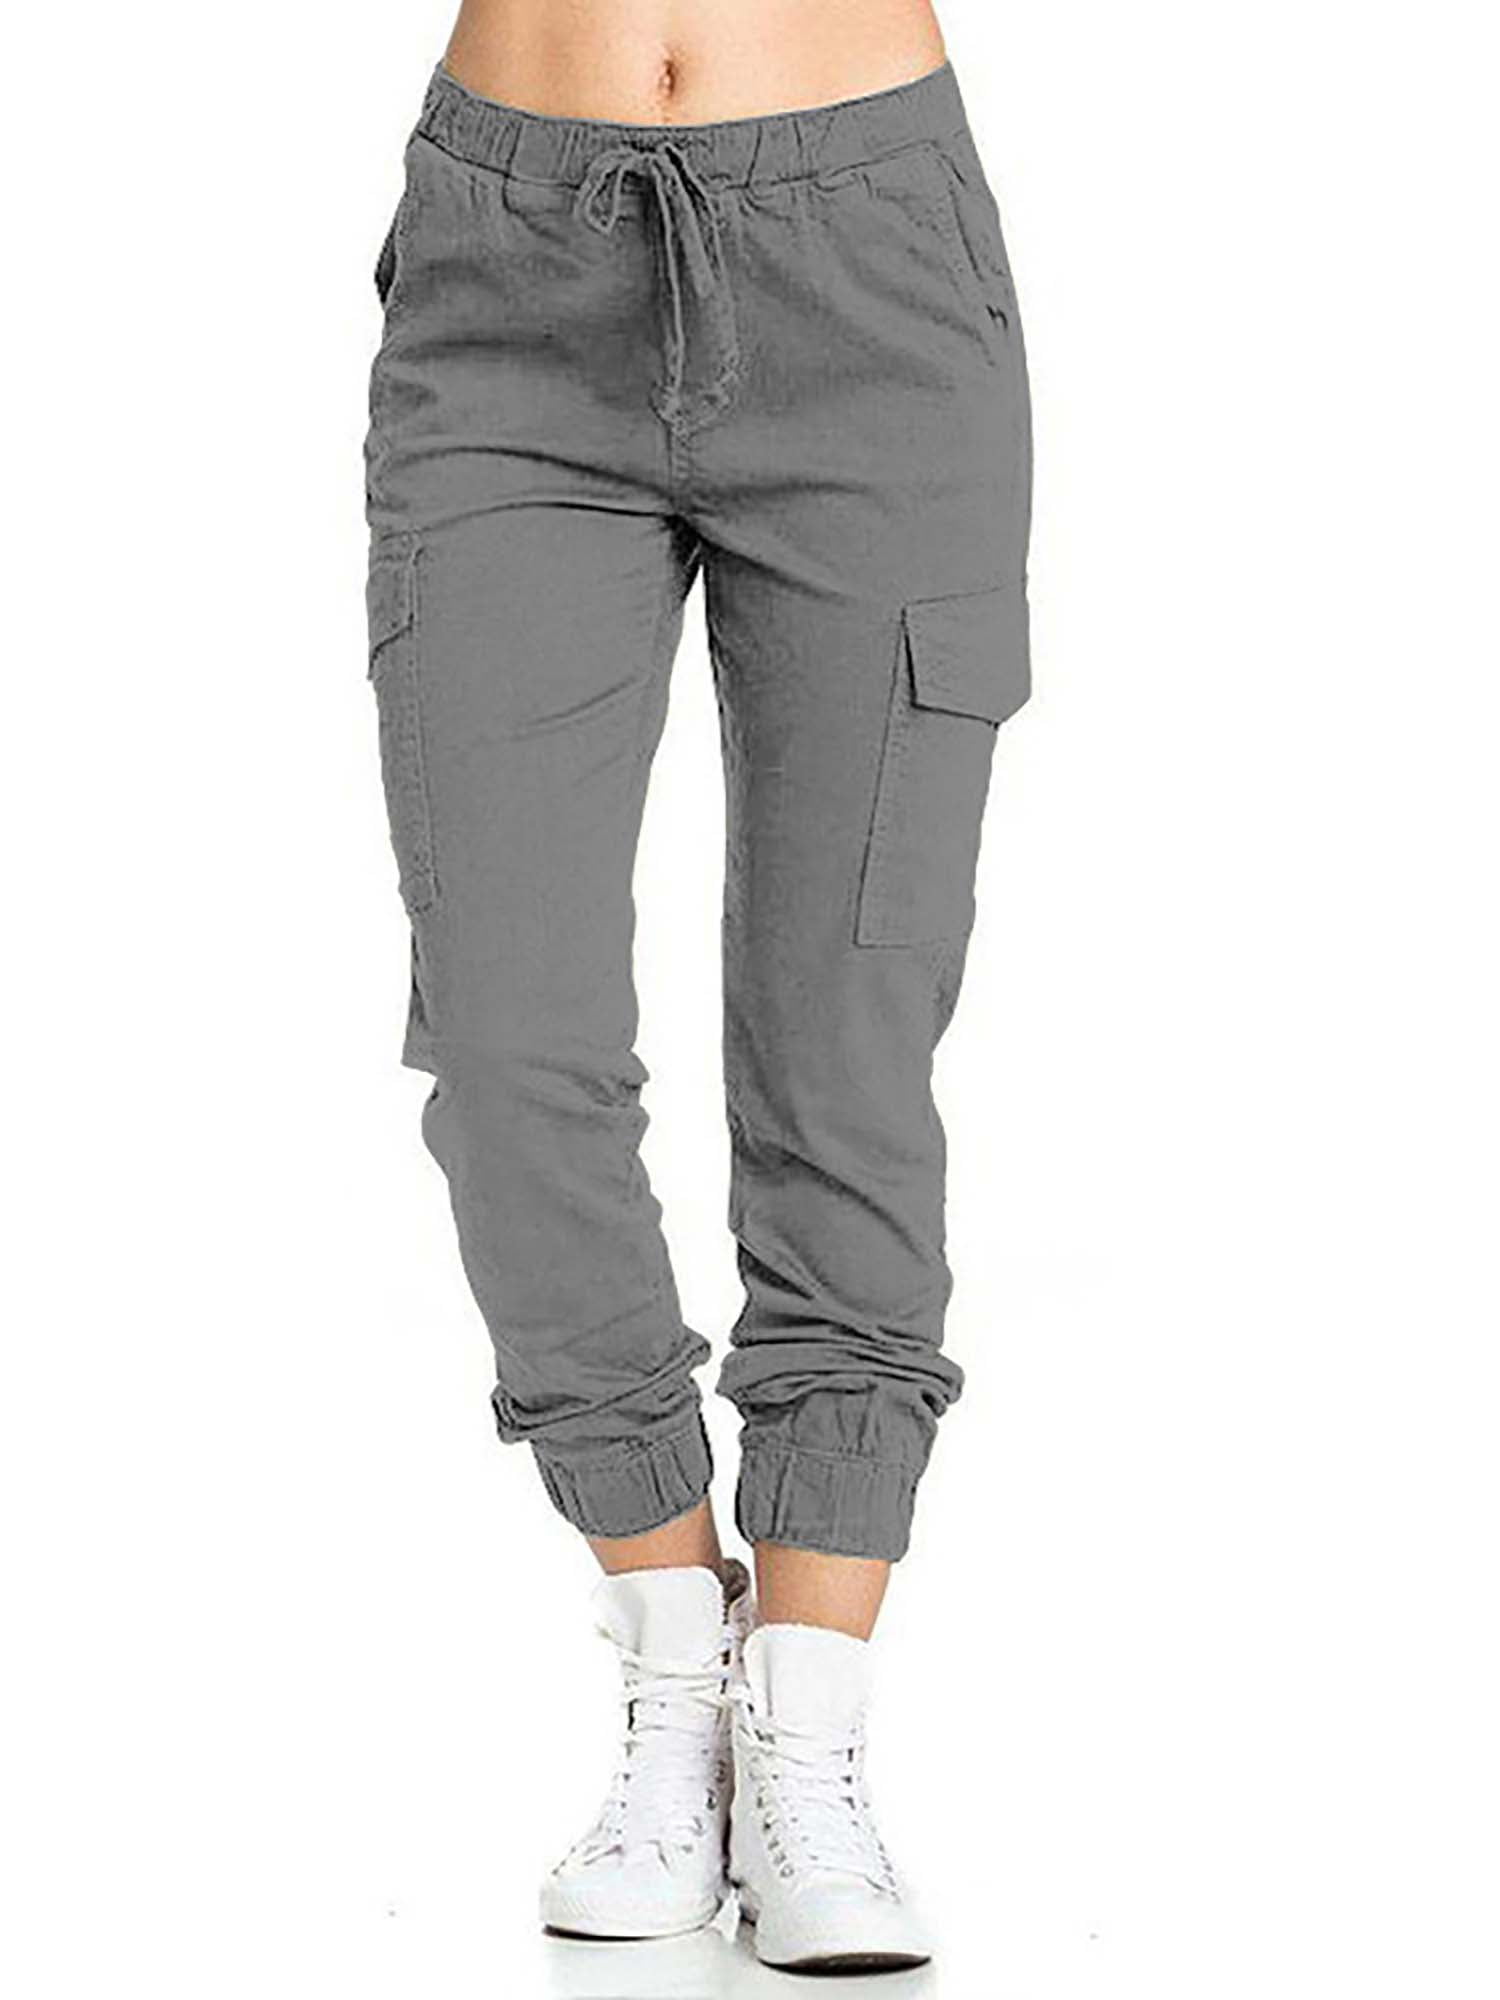 Plus Size Womens Cargo Pants With Belt, High Waisted Wide Leg Womens Cuffed  Cargo Trousers For Relaxed Style 230516 From Mang03, $19.98 | DHgate.Com